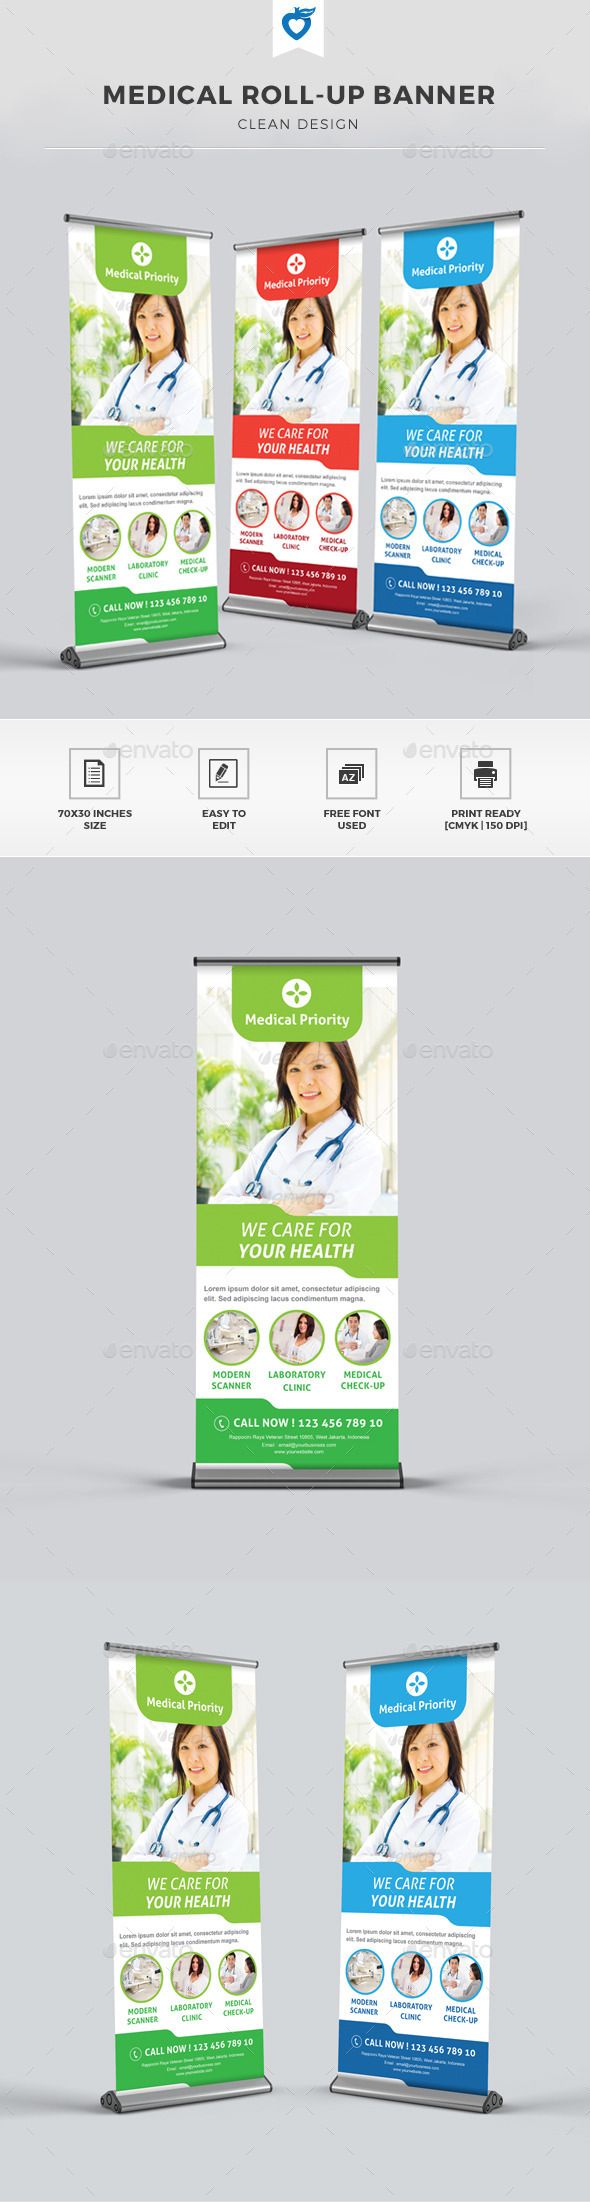 Healthcare-Advertising-Medical-Roll-up-Banner-Template-design-Download-graphicriver.net Healthcare Advertising : Medical Roll-up Banner Template #design Download: graphicriver.net/...